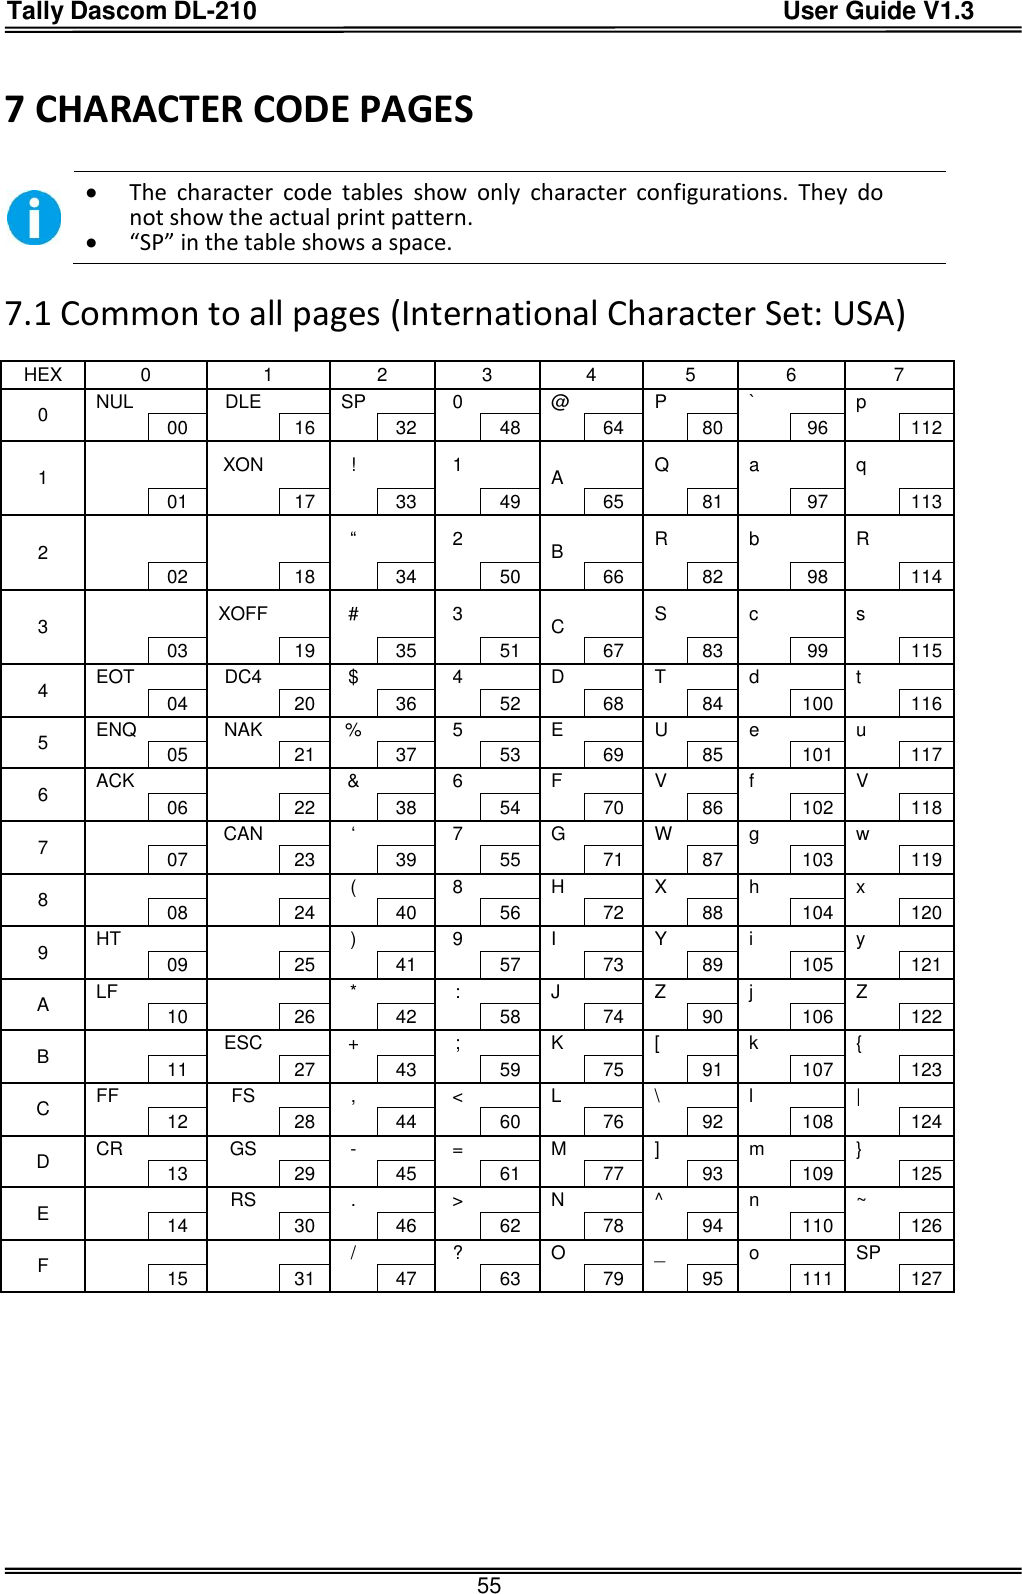 Tally Dascom DL-210                                          User Guide V1.3  55 7 CHARACTER CODE PAGES     The  character  code  tables  show  only  character  configurations.  They  do not show the actual print pattern.  “SP” in the table shows a space.  7.1 Common to all pages (International Character Set: USA)  HEX 0 1 2 3 4 5 6 7 0 NUL    DLE    SP    0    @    P    `    p      00  16   32  48   64  80   96  112 1     XON    !    1     A   Q    a    q      01   17   33   49   65   81   97   113 2        “    2    B   R   b    R     02  18   34  50   66  82   98  114 3     XOFF    #    3     C   S    c    s      03   19   35   51   67   83   99   115 4 EOT    DC4   $    4   D    T   d    t     04  20   36  52   68  84   100  116 5 ENQ    NAK    %    5    E    U    e    u      05   21   37   53   69   85   101   117 6 ACK       &amp;    6   F    V   f    V     06  22   38  54   70  86   102  118 7     CAN    ‘    7    G    W    g    w      07   23   39   55   71   87   103   119 8        (    8   H    X   h    x     08  24   40  56   72  88   104  120 9 HT        )    9    I    Y    i    y      09   25   41   57   73   89   105   121 A LF       *    :   J    Z   j    Z     10  26   42  58   74  90   106  122 B     ESC    +    ;    K    [    k    {      11   27   43   59   75   91   107   123 C FF    FS   ,    &lt;   L    \   l    |     12  28   44  60   76  92   108  124 D CR    GS    -    =    M    ]    m    }      13   29   45   61   77   93   109   125 E     RS   .    &gt;   N    ^   n    ~     14  30   46  62   78  94   110  126 F         /    ?    O    _    o    SP      15   31   47   63   79   95   111   127      